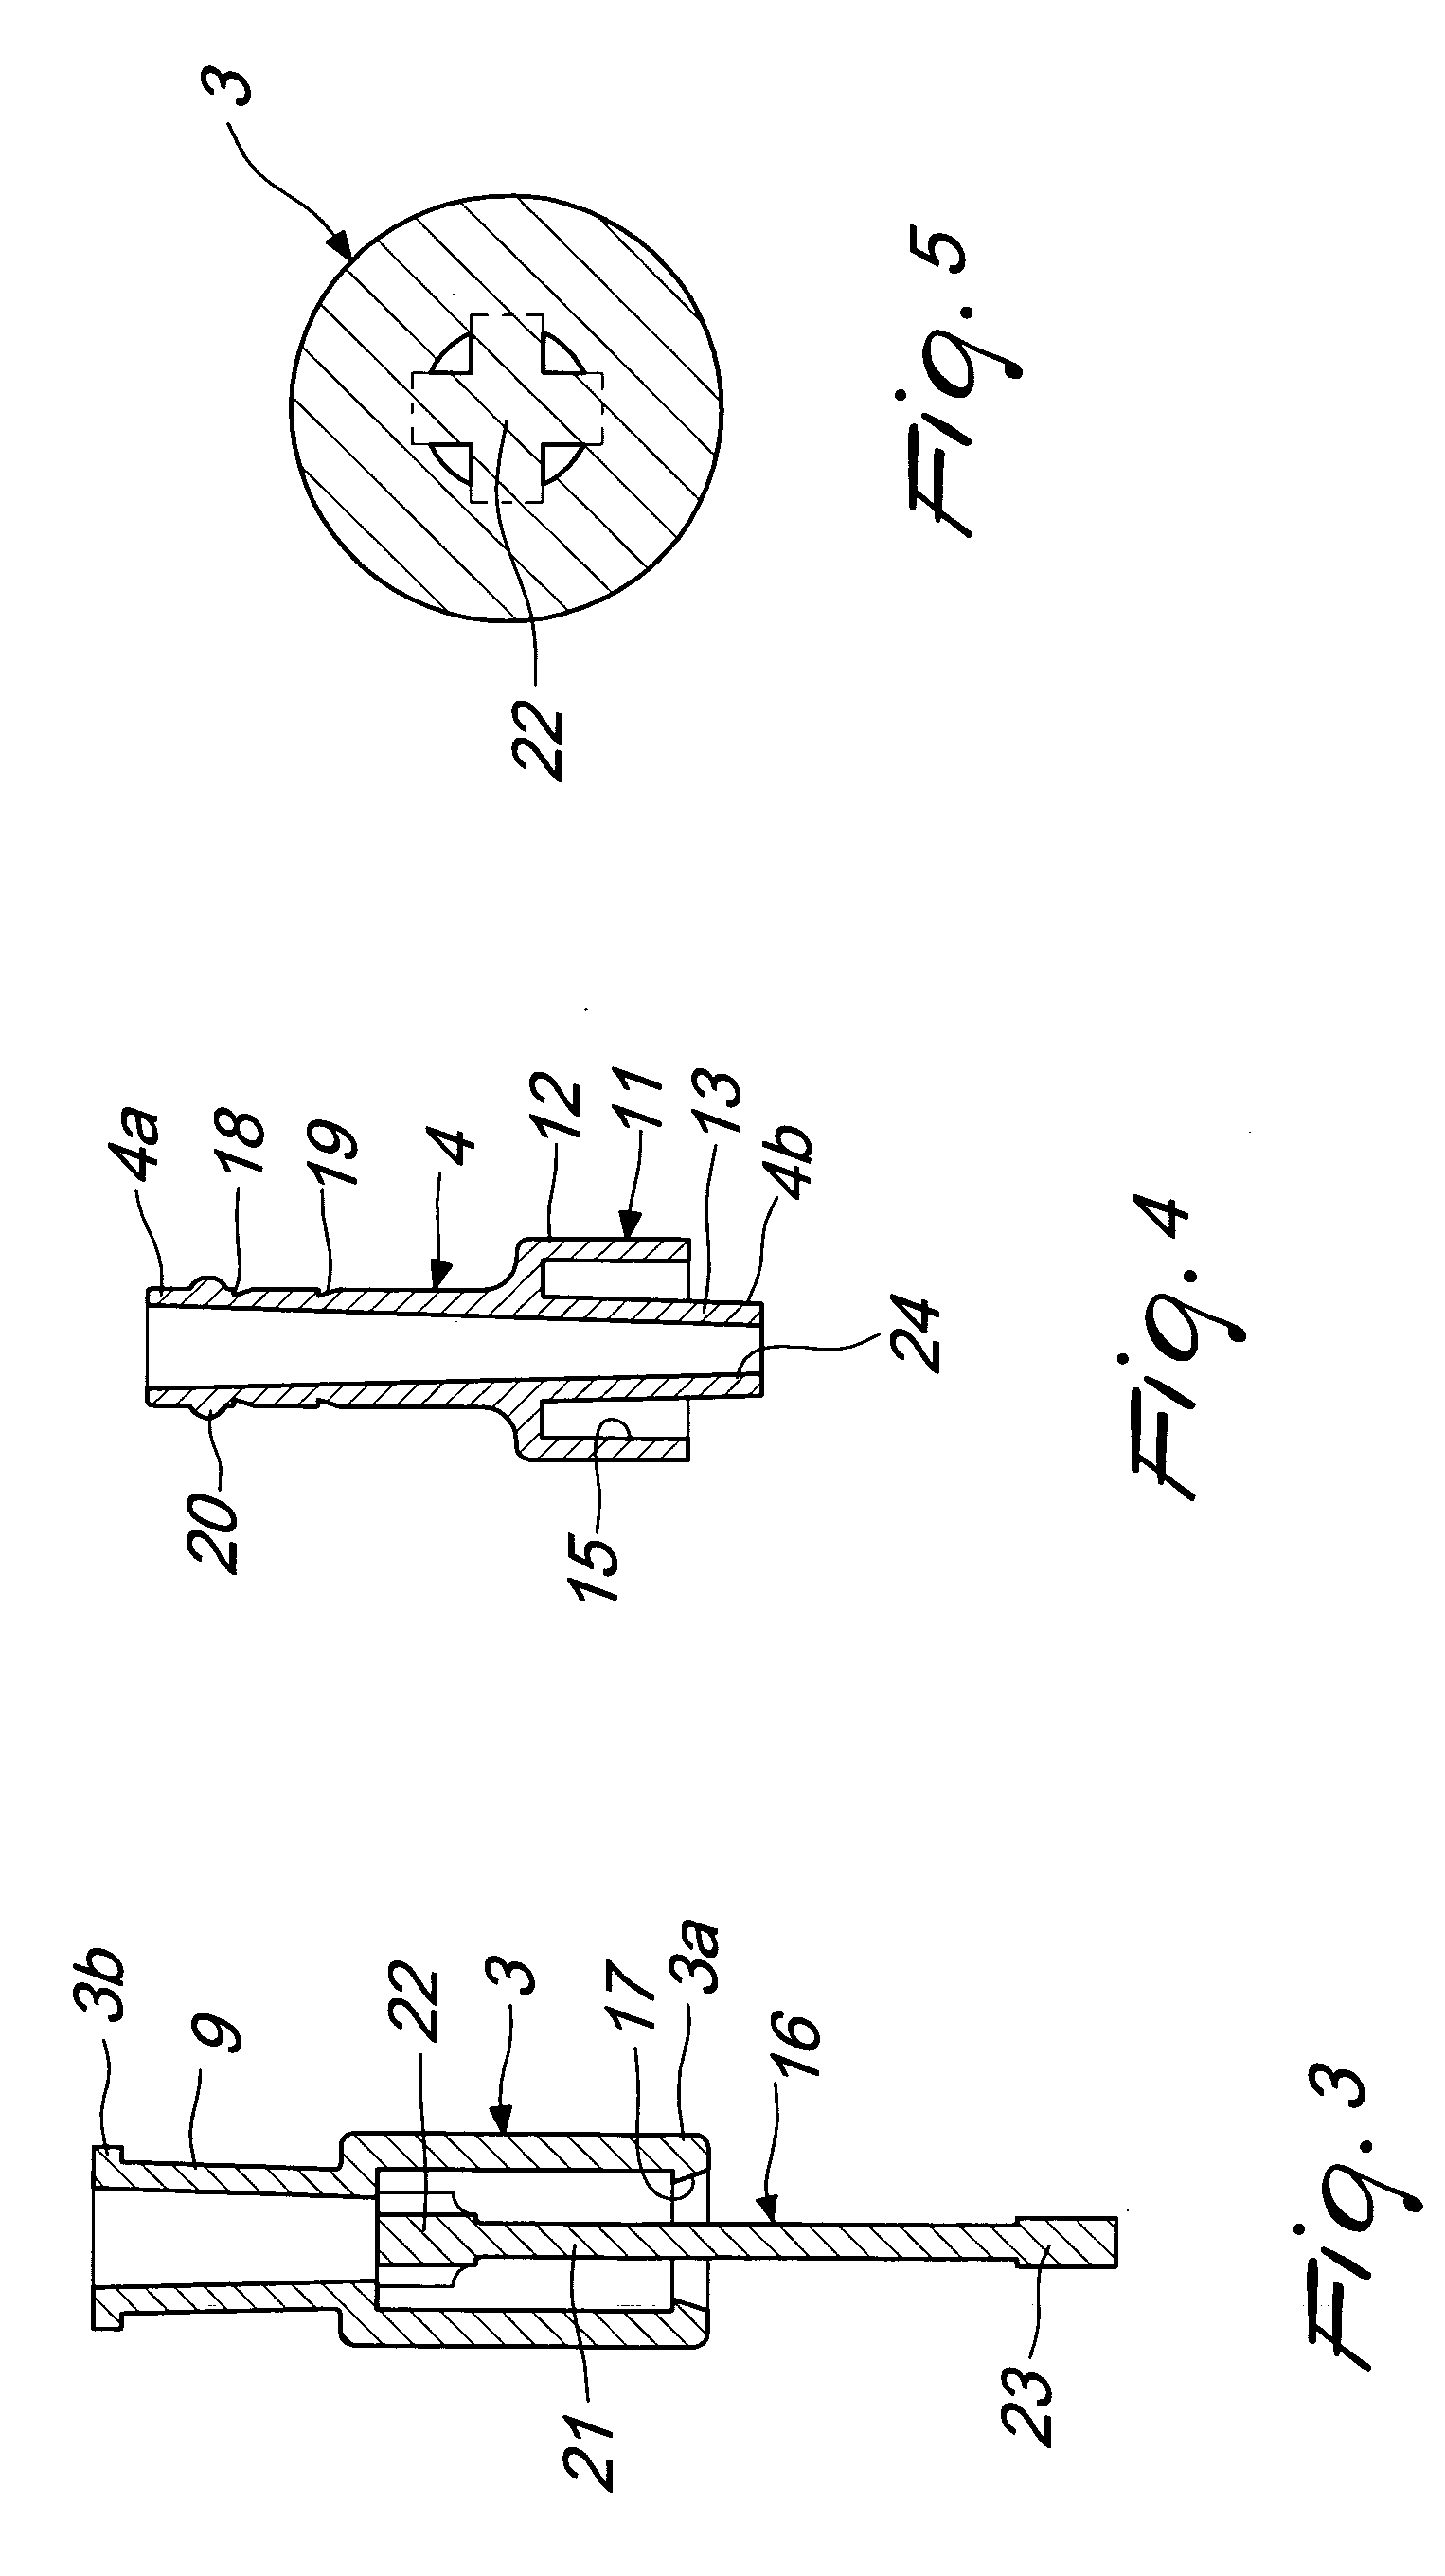 Closure device for containers or lines for administering medical or pharmaceutical fluids